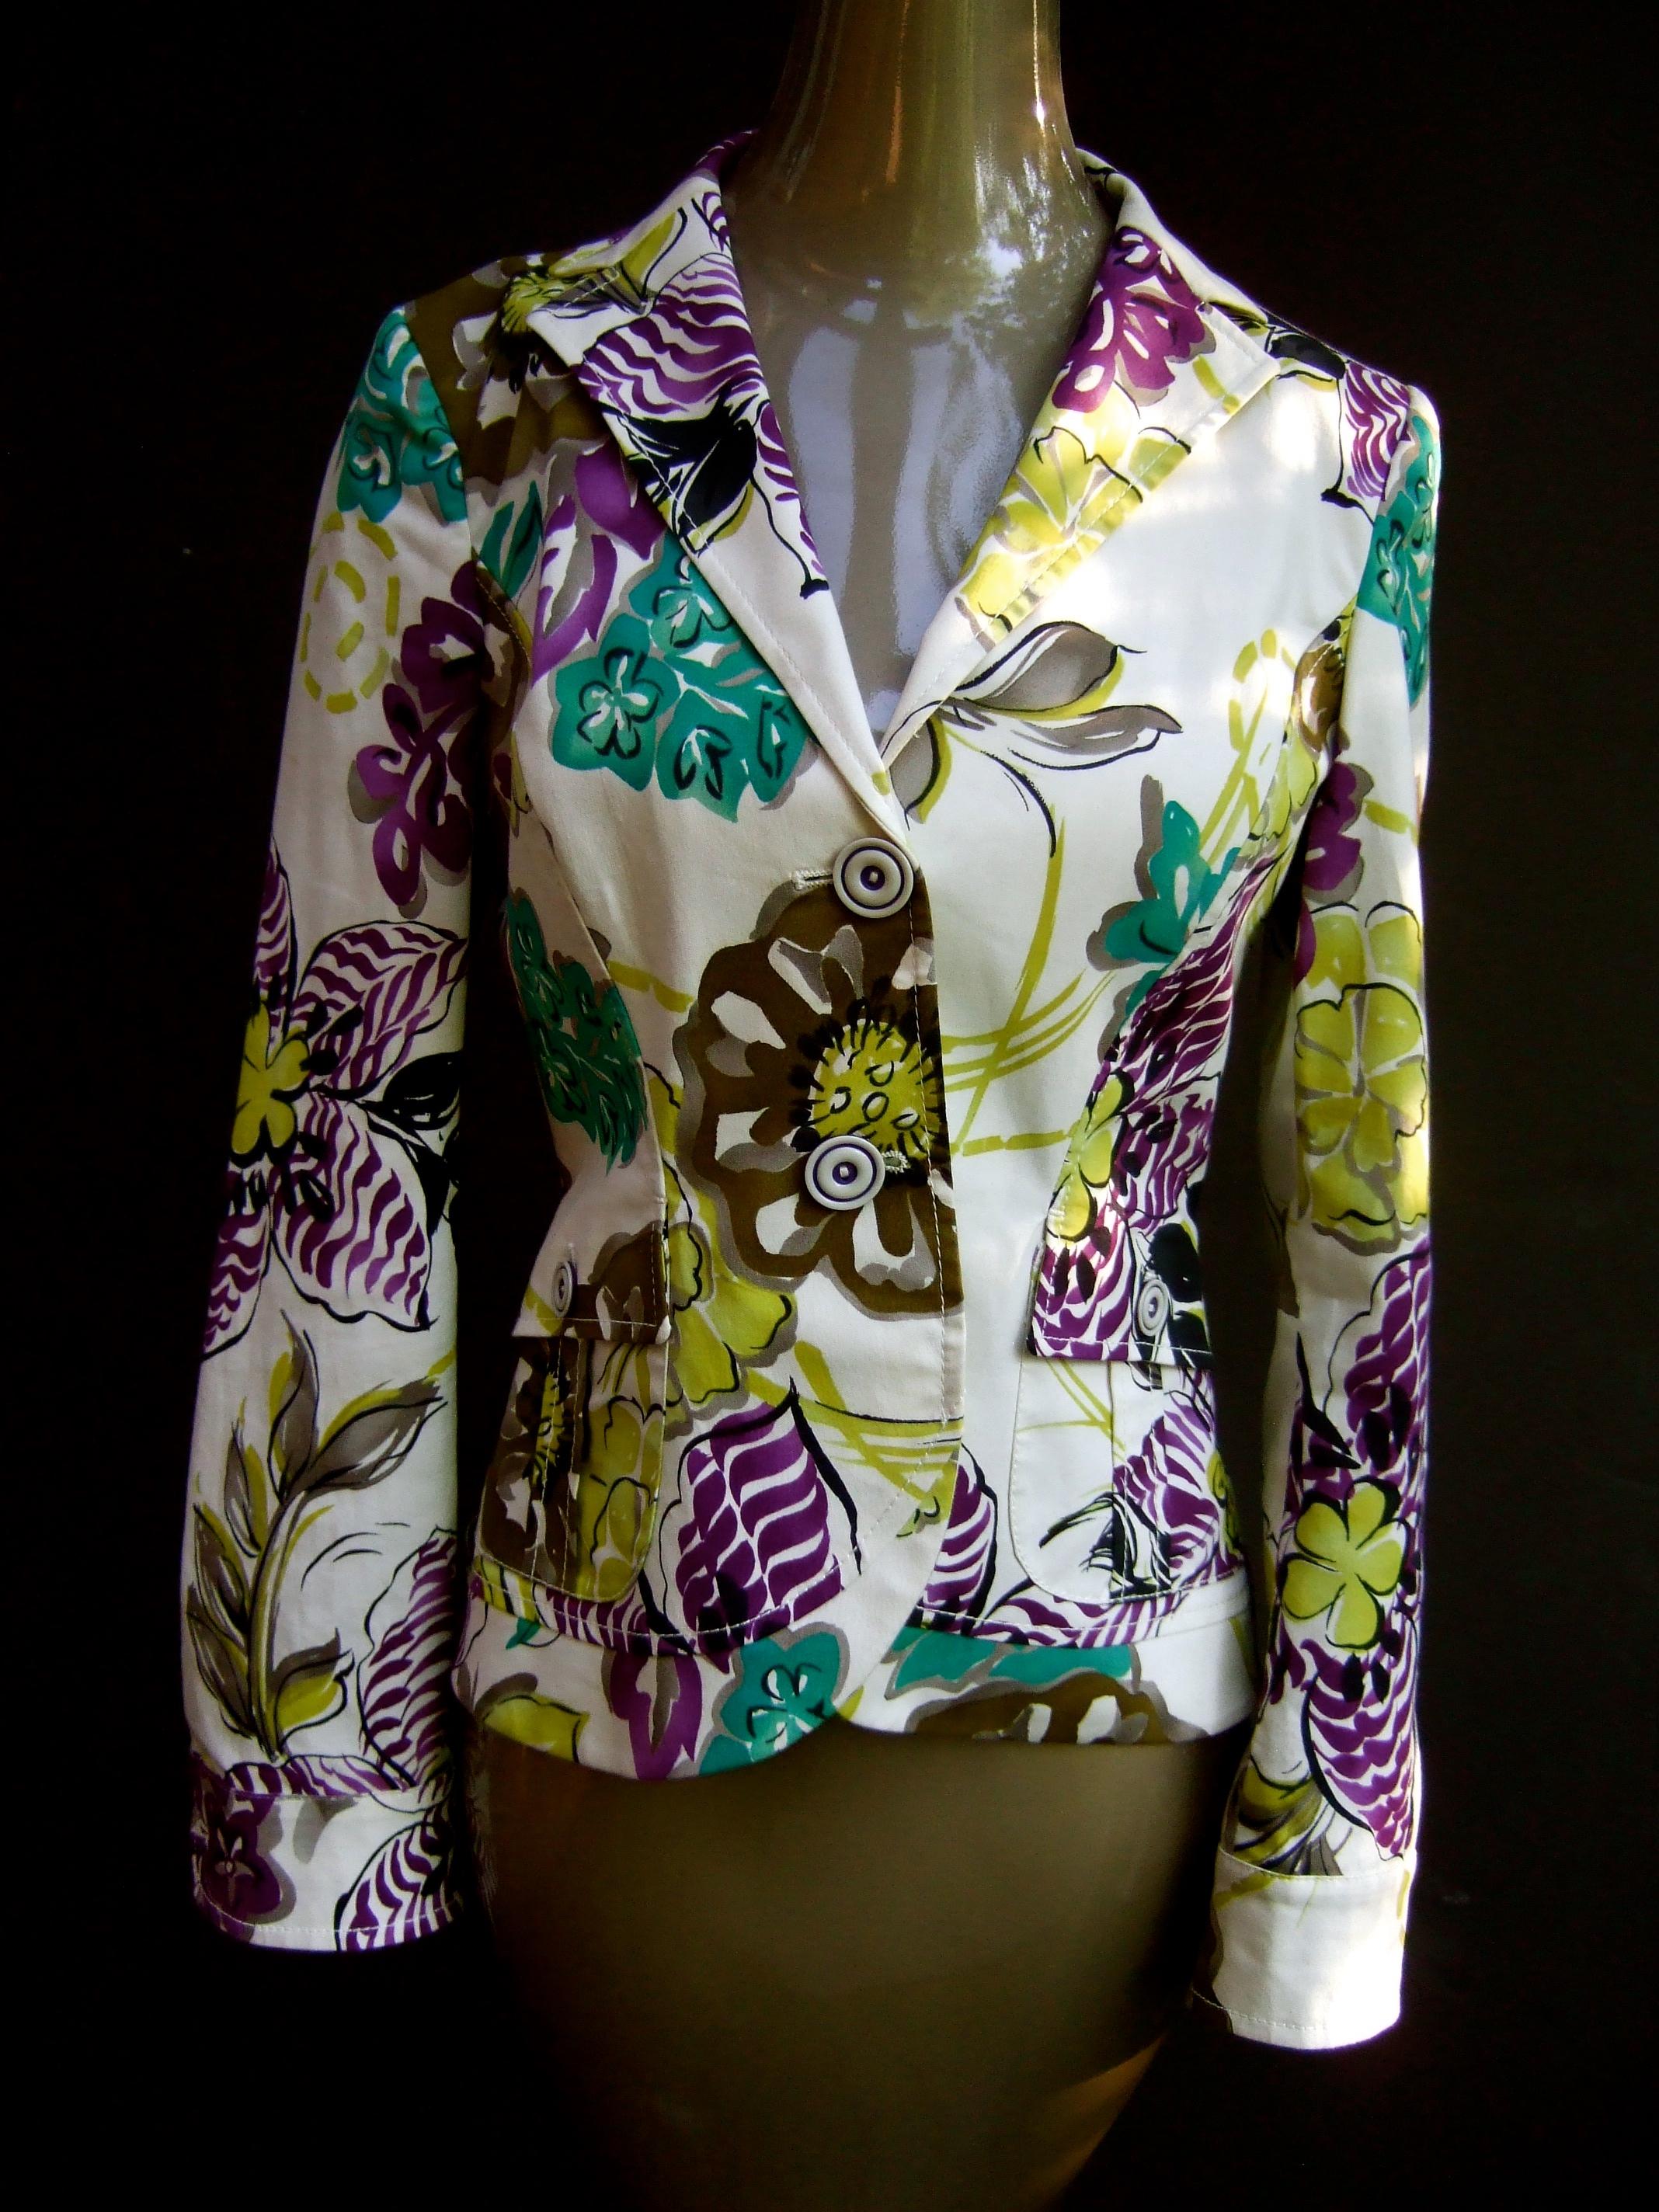 Etro Milano Crisp vibrant floral print cotton jacket Size 42 
Designed with a pair of flap covered pockets 
Lined in violet & chartreuse vertical stripes
The backside cinches with an adjustable tab buckle 
Accented with striped resin buttons 

The